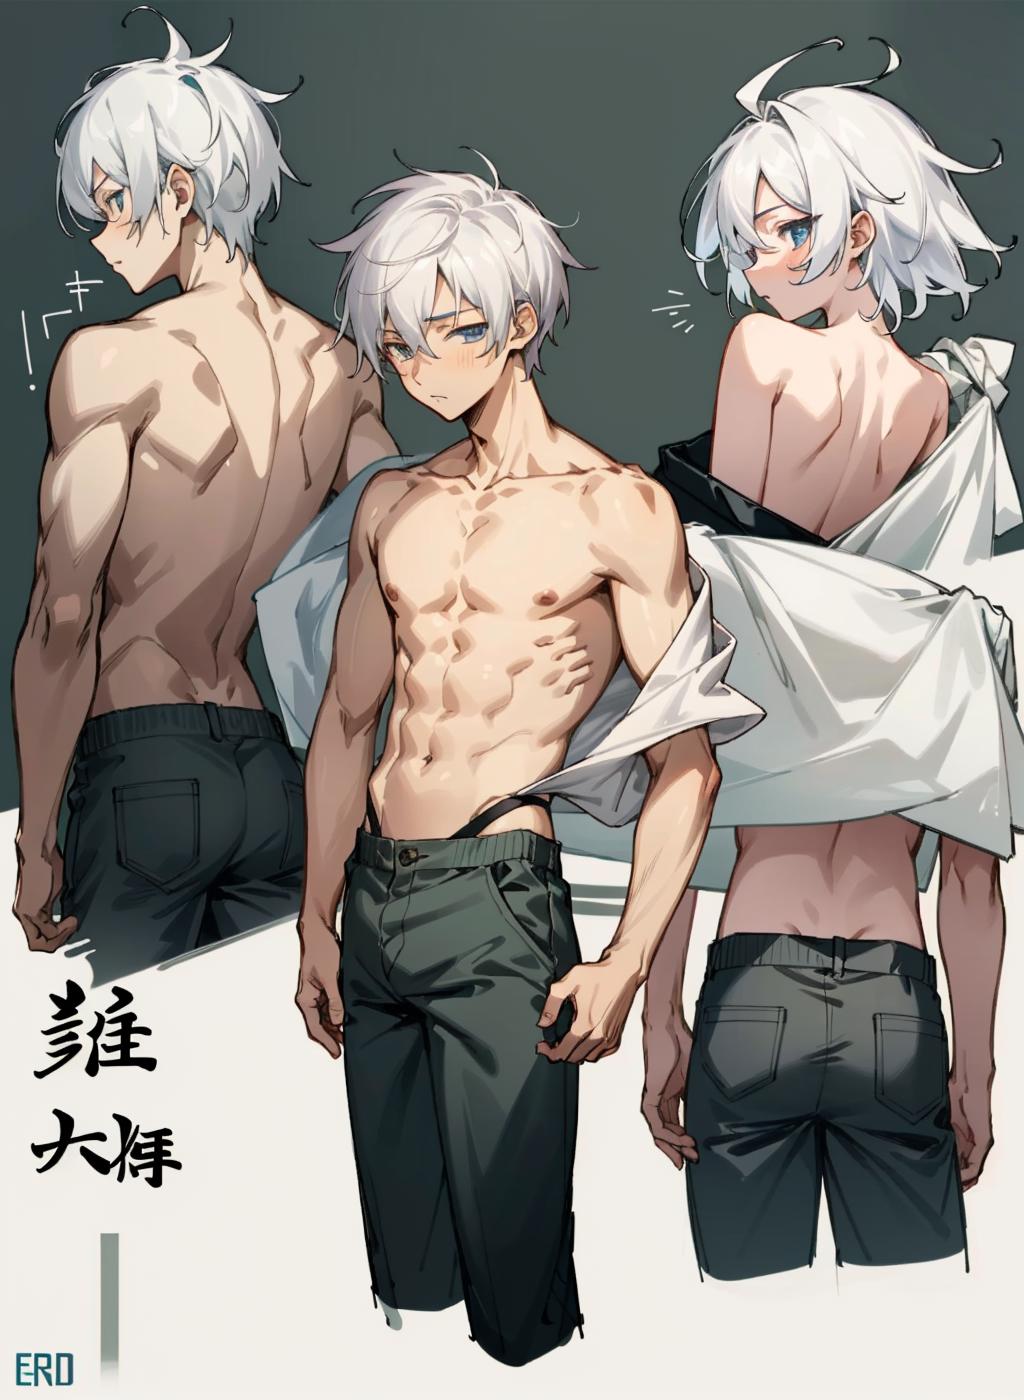 Shirtless Anime Boys — The full version of the Barakamon poster from the...